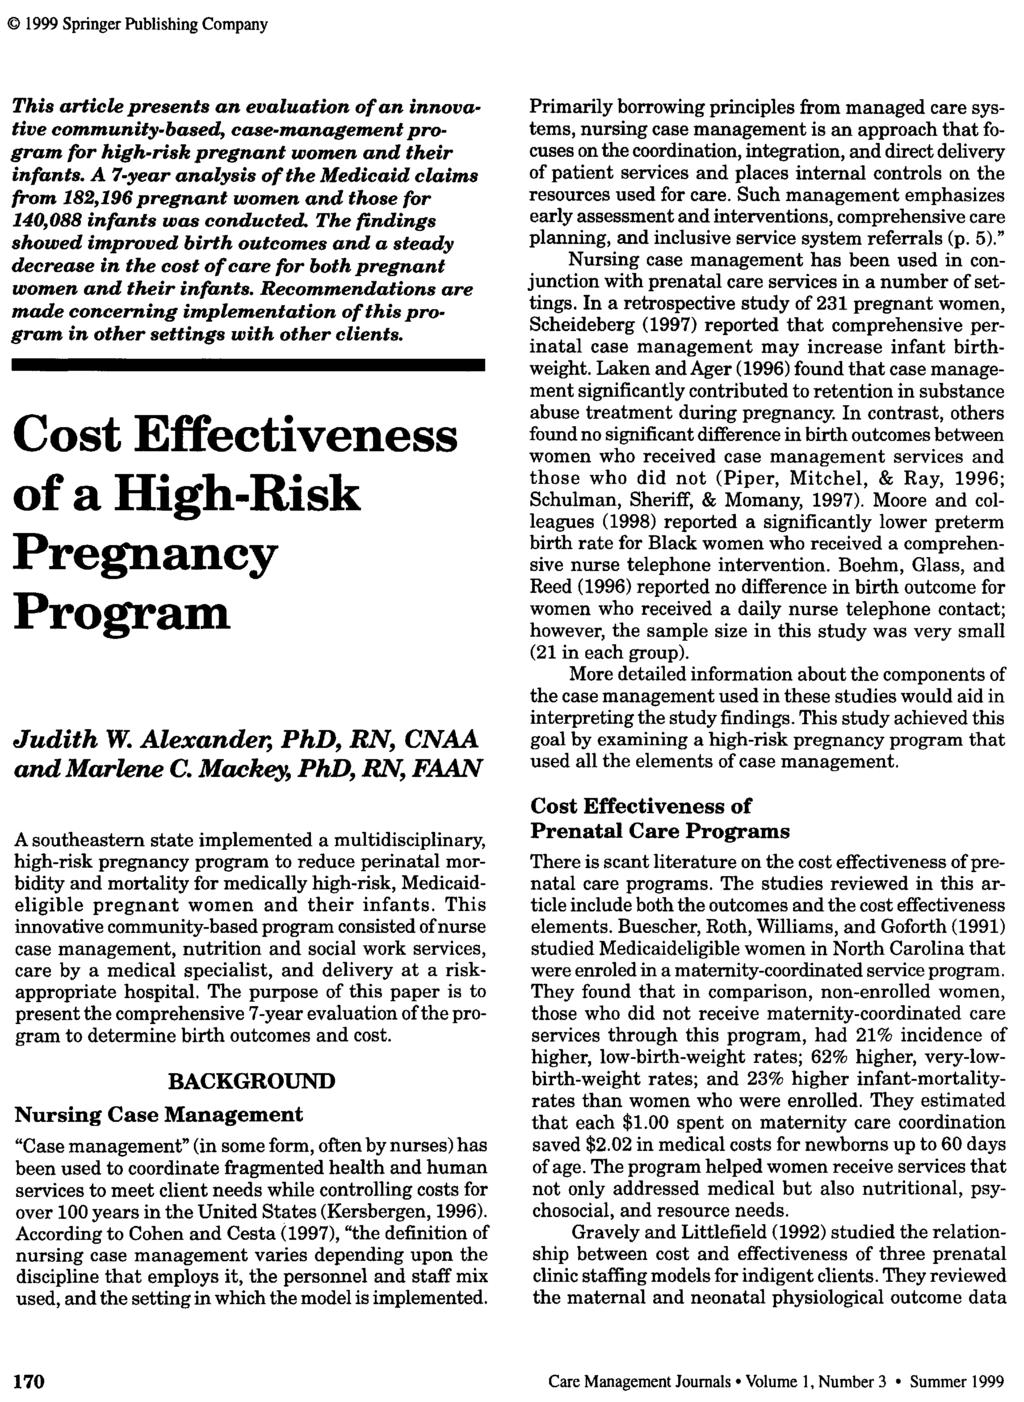 1999 Springer Publishing Company This article presents an evaluation of an innovative community-based, case-management program for high-risk pregnant women and their infants.